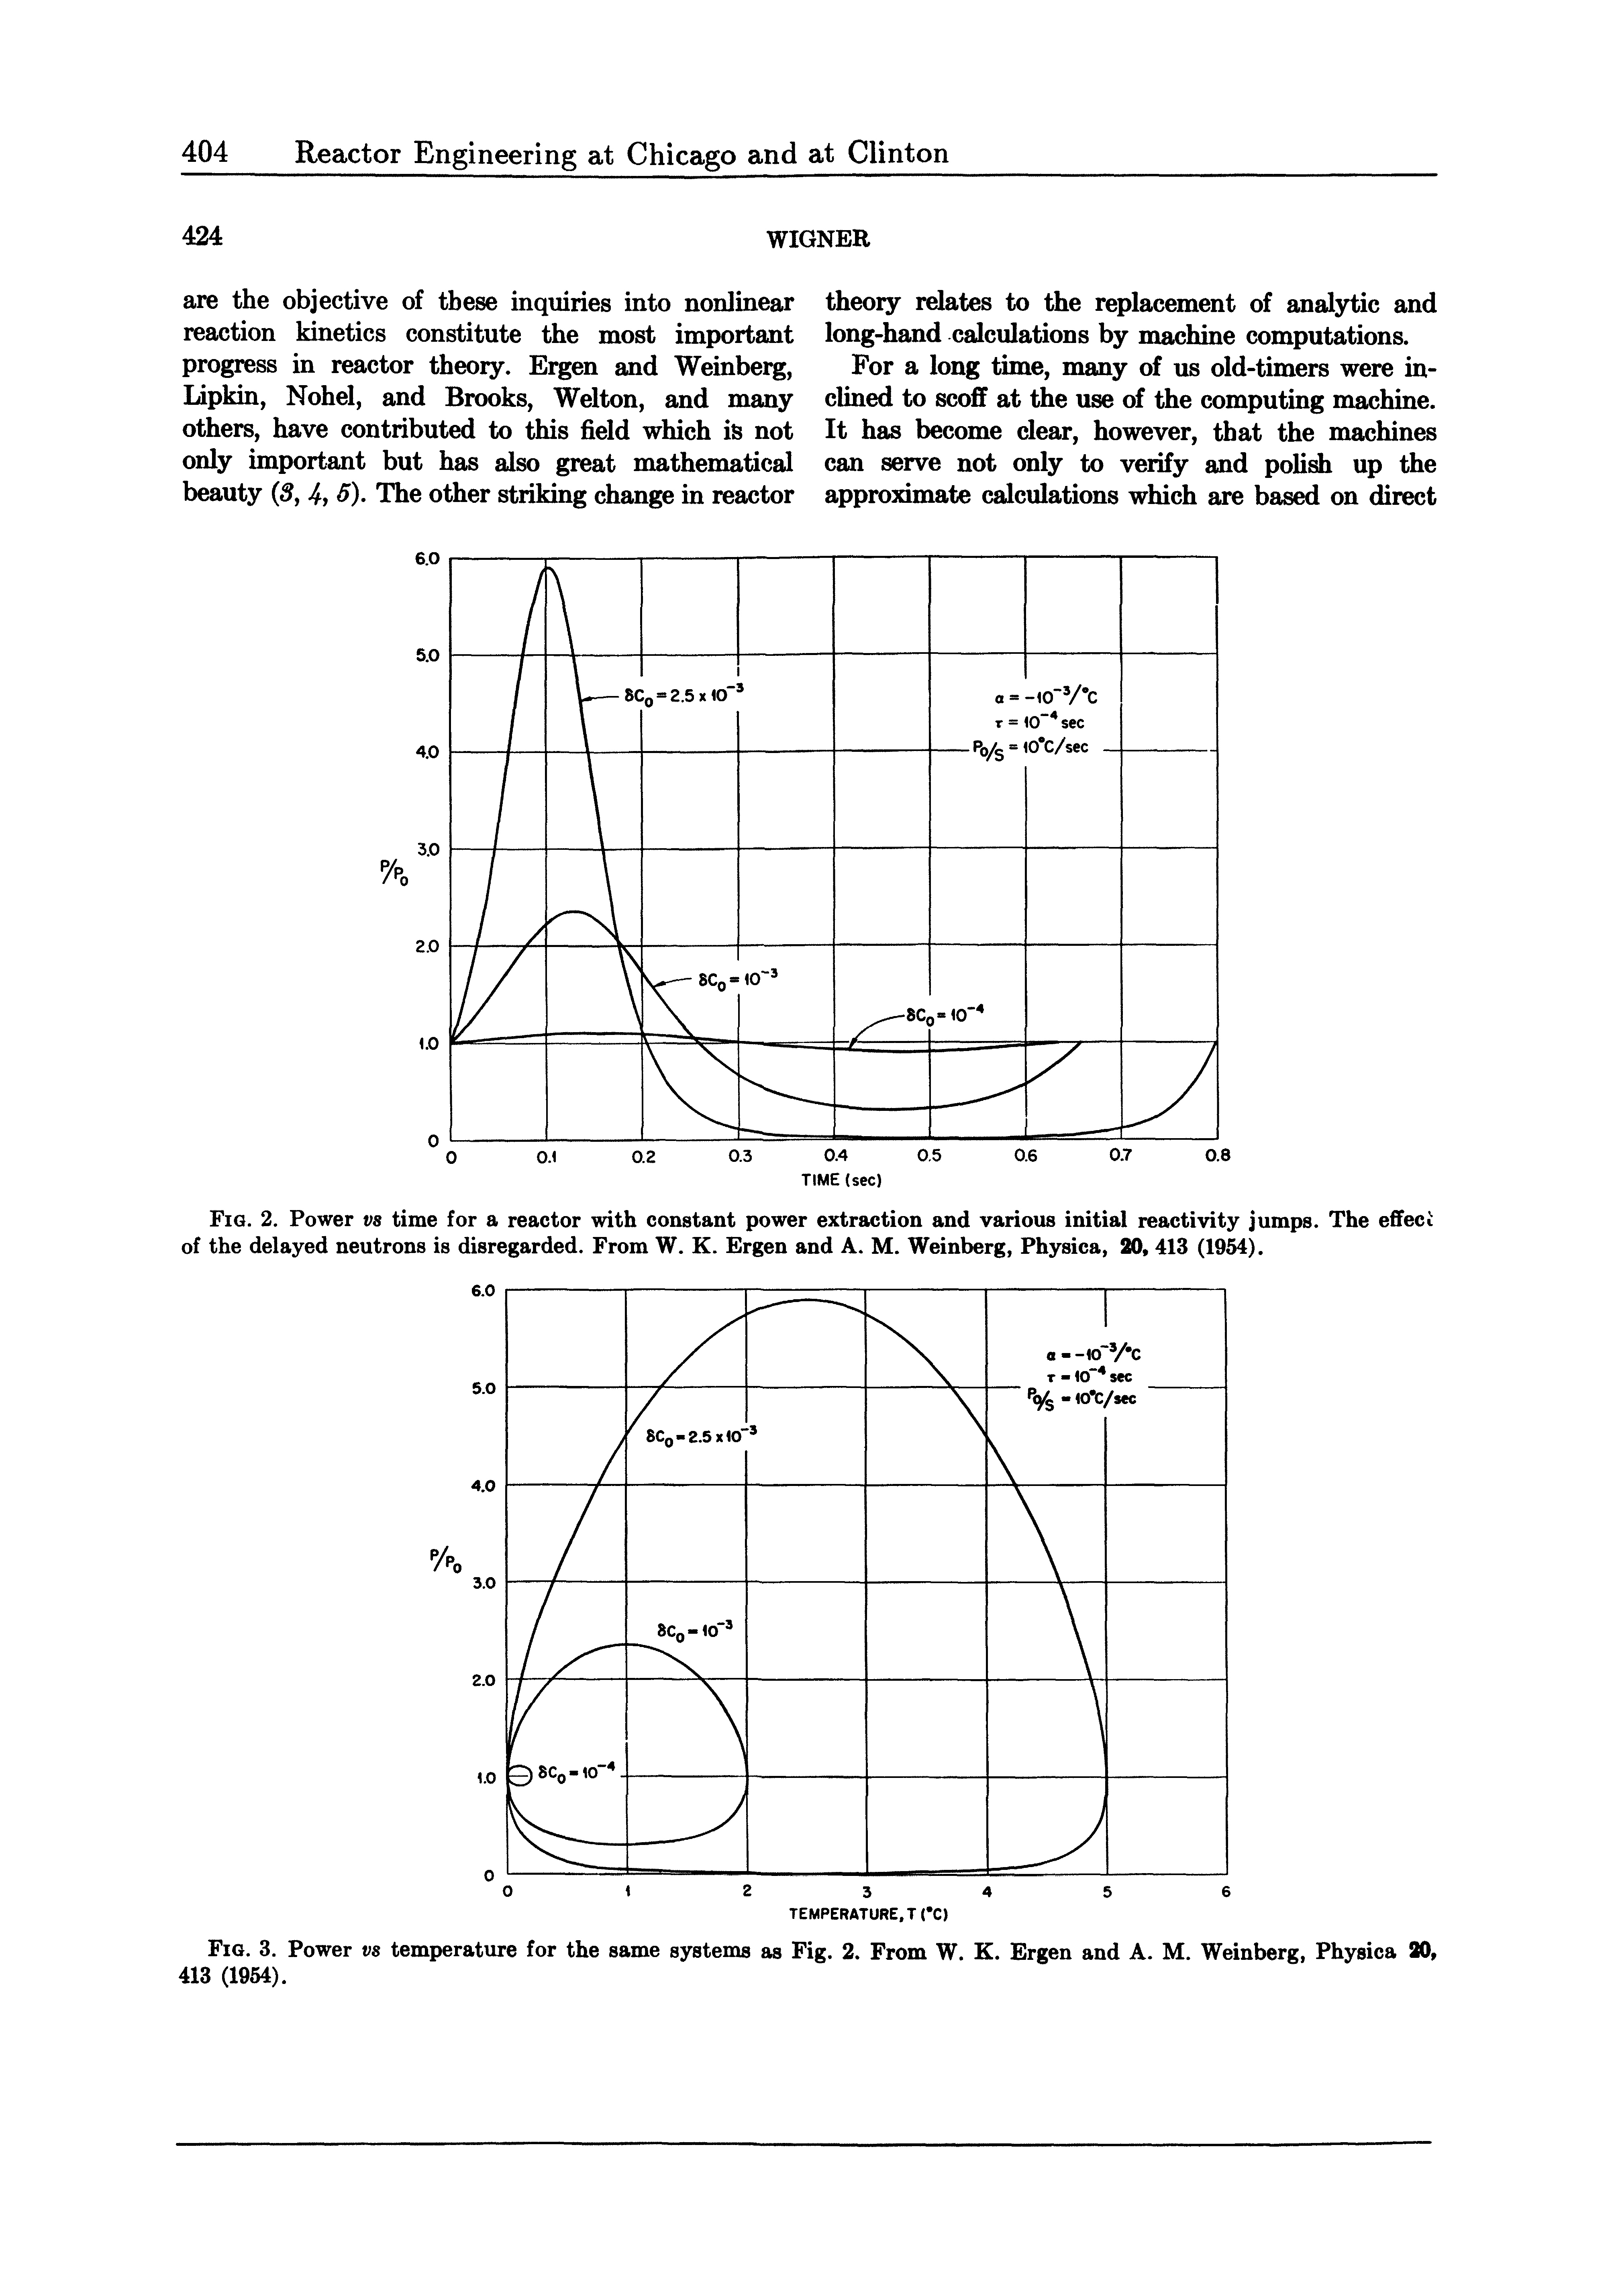 Fig. 2. Power vs time for a reactor with constant power extraction and various initial reactivity jumps. The effeci of the delayed neutrons is disregarded. From W. K. Ergen and A. M. Weinberg, Physica, 20, 413 (1954).